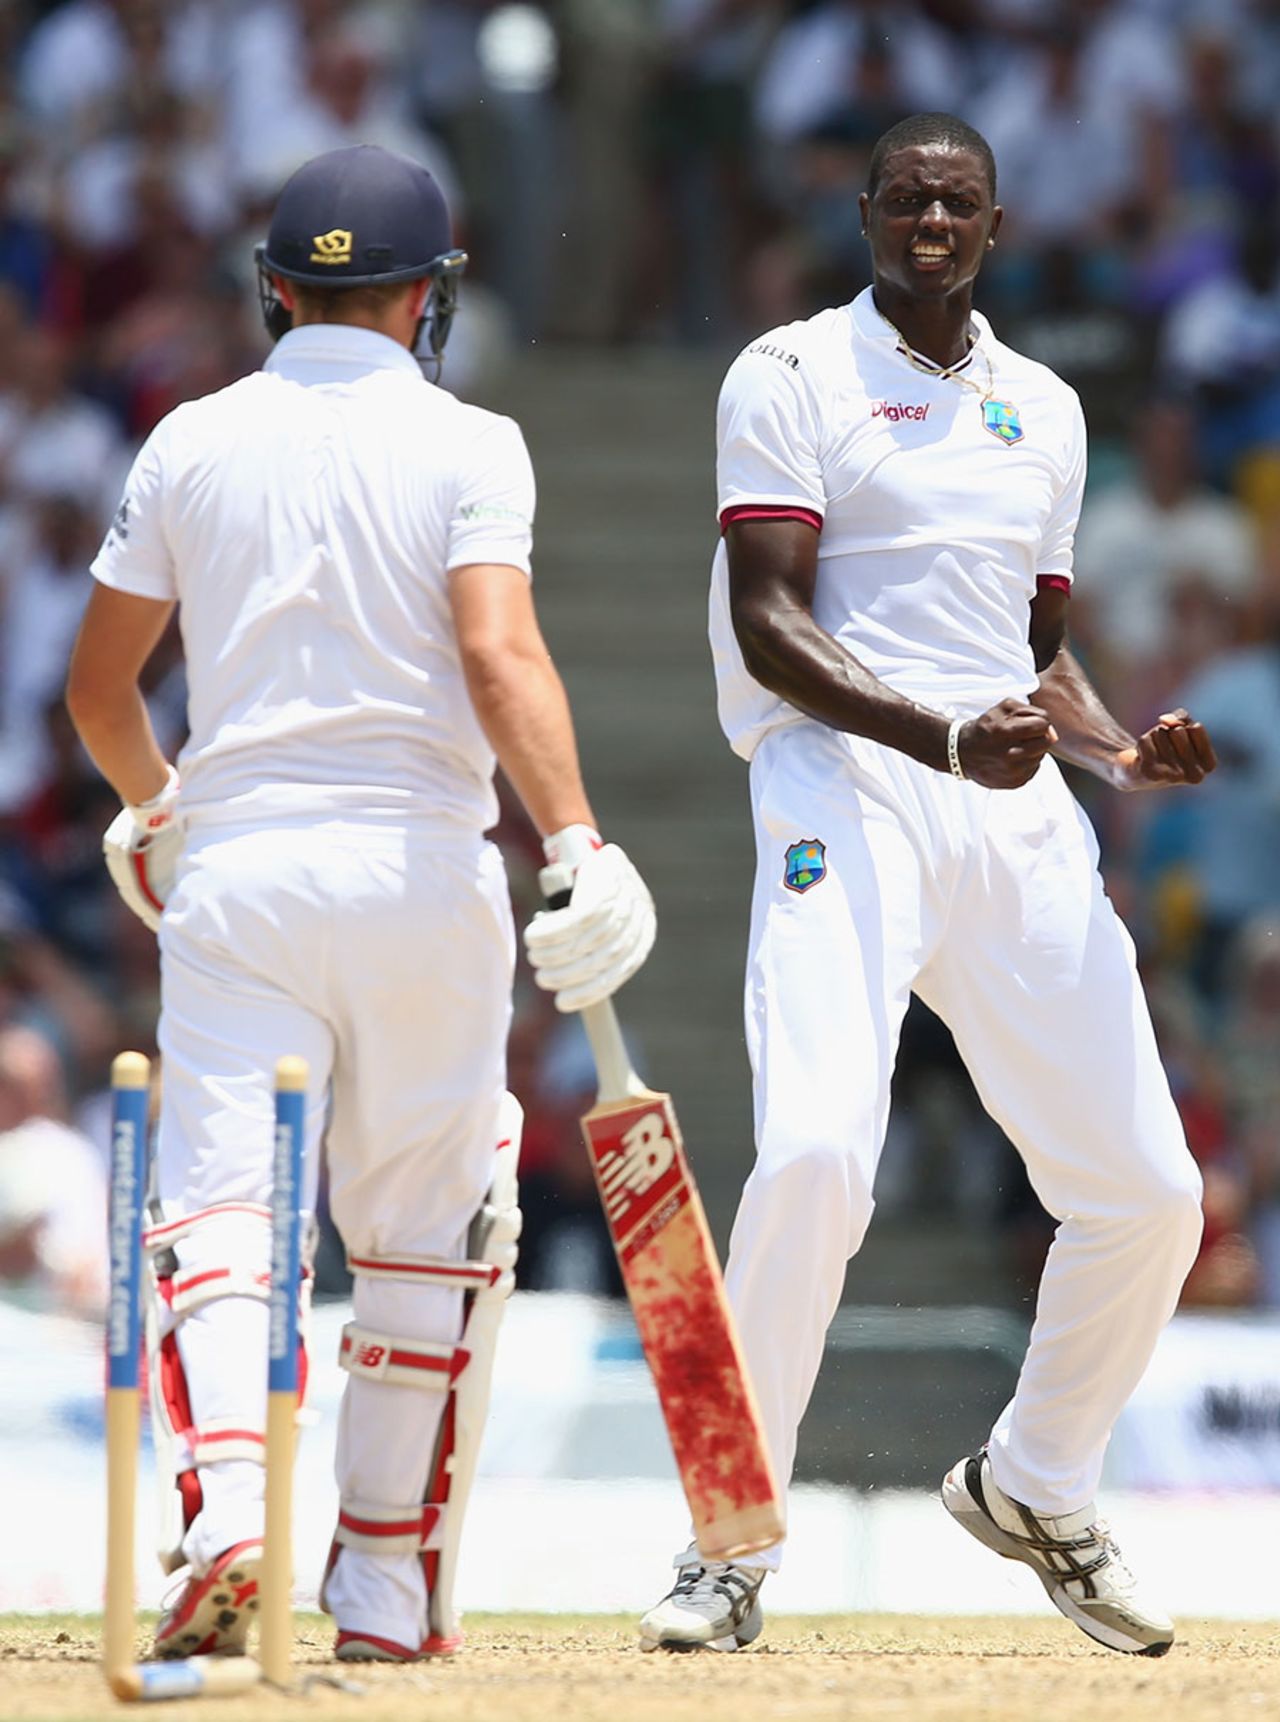 Jason Holder ripped out Gary Ballance's off stump, West Indies v England, 3rd Test, Bridgetown, 1st day, May 1, 2015